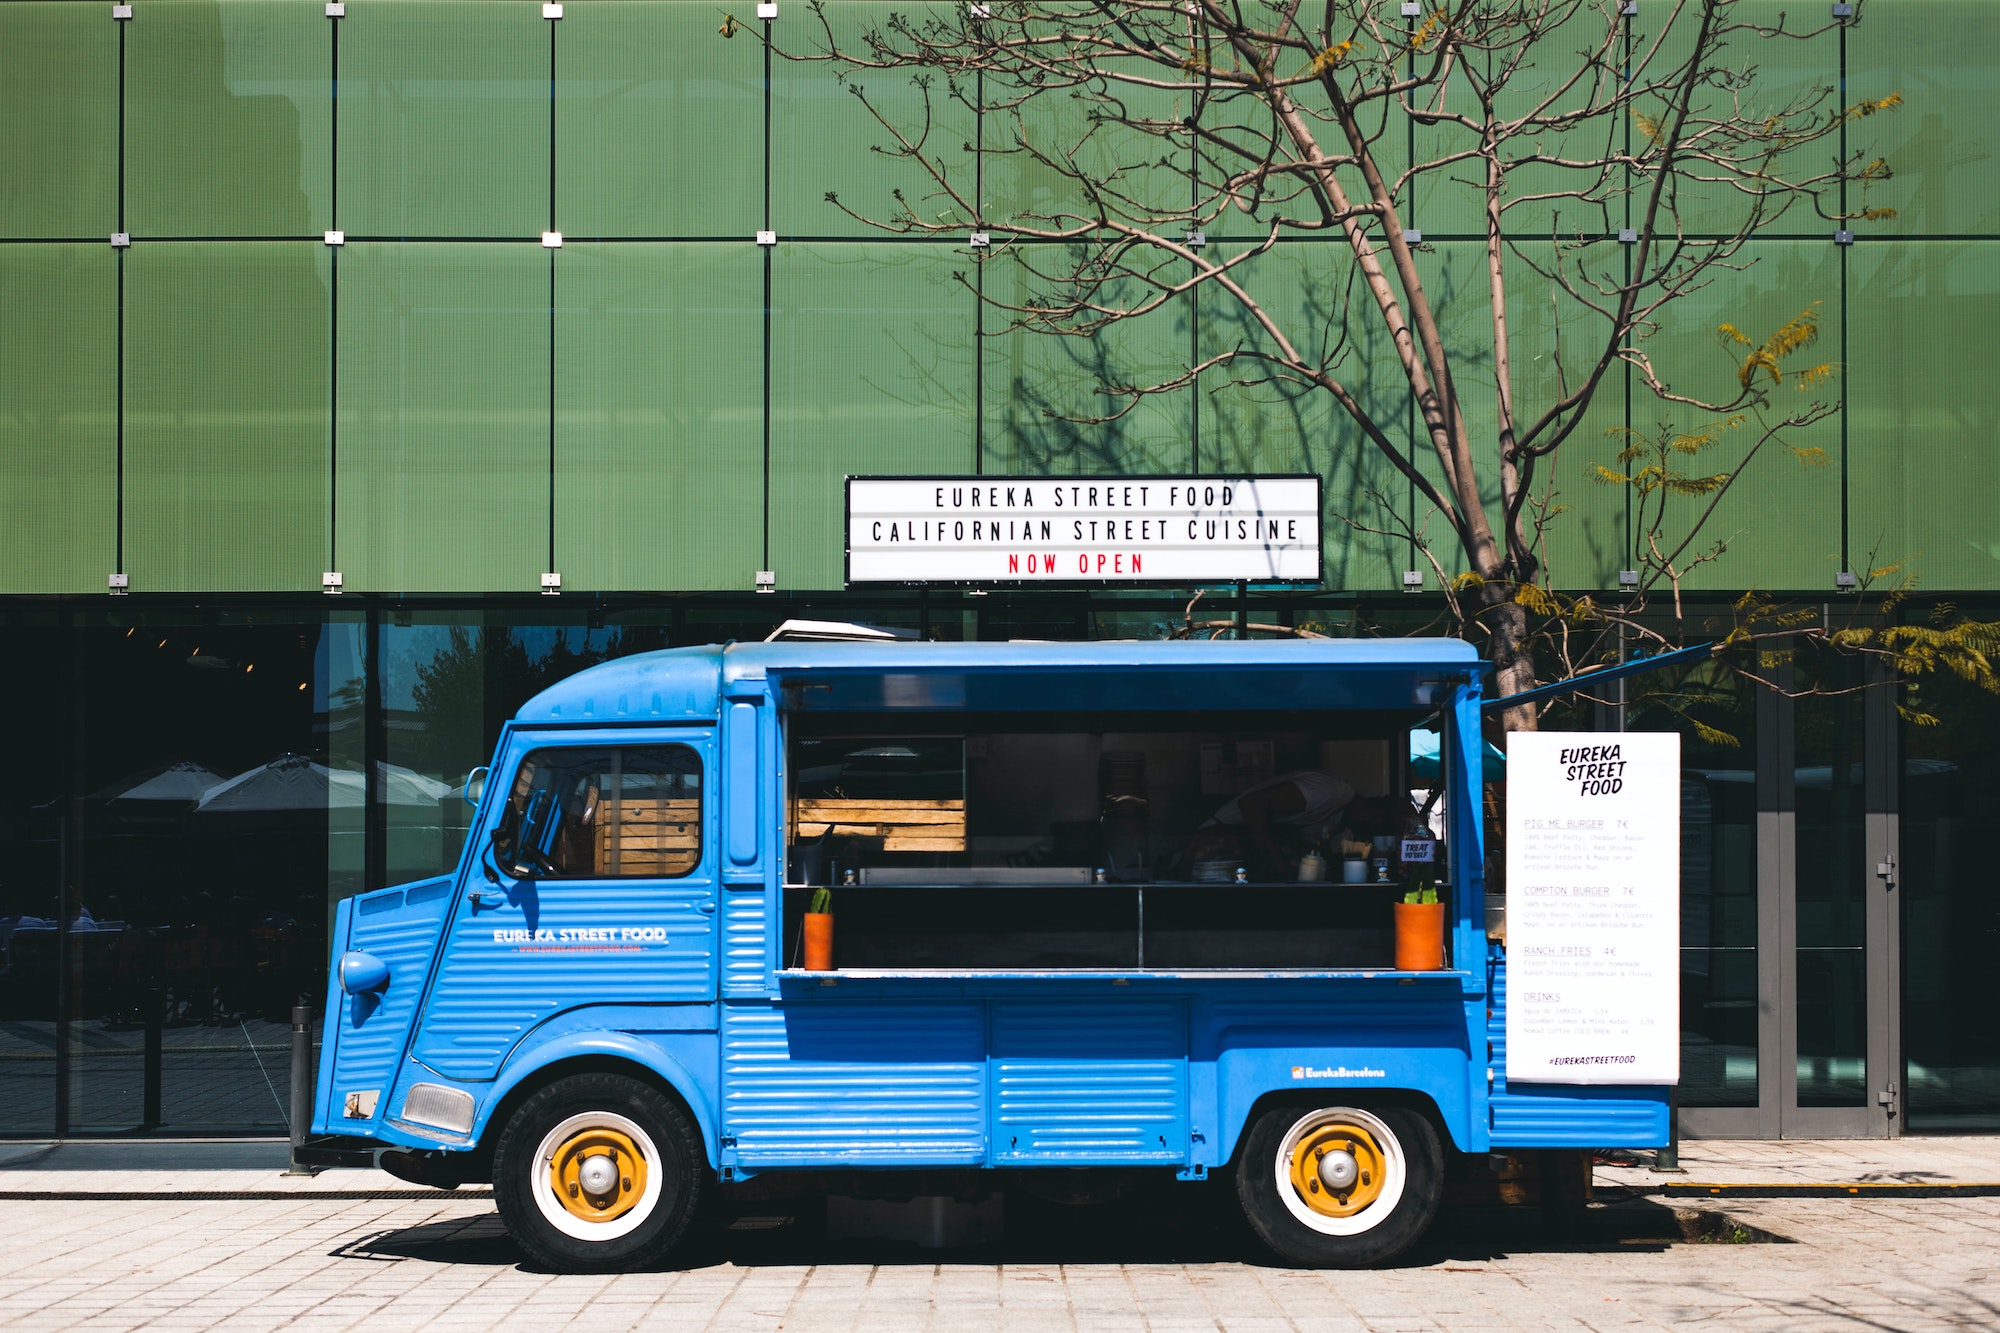 Food trucks allow owners to experiment with location and identify where the market is more responsive